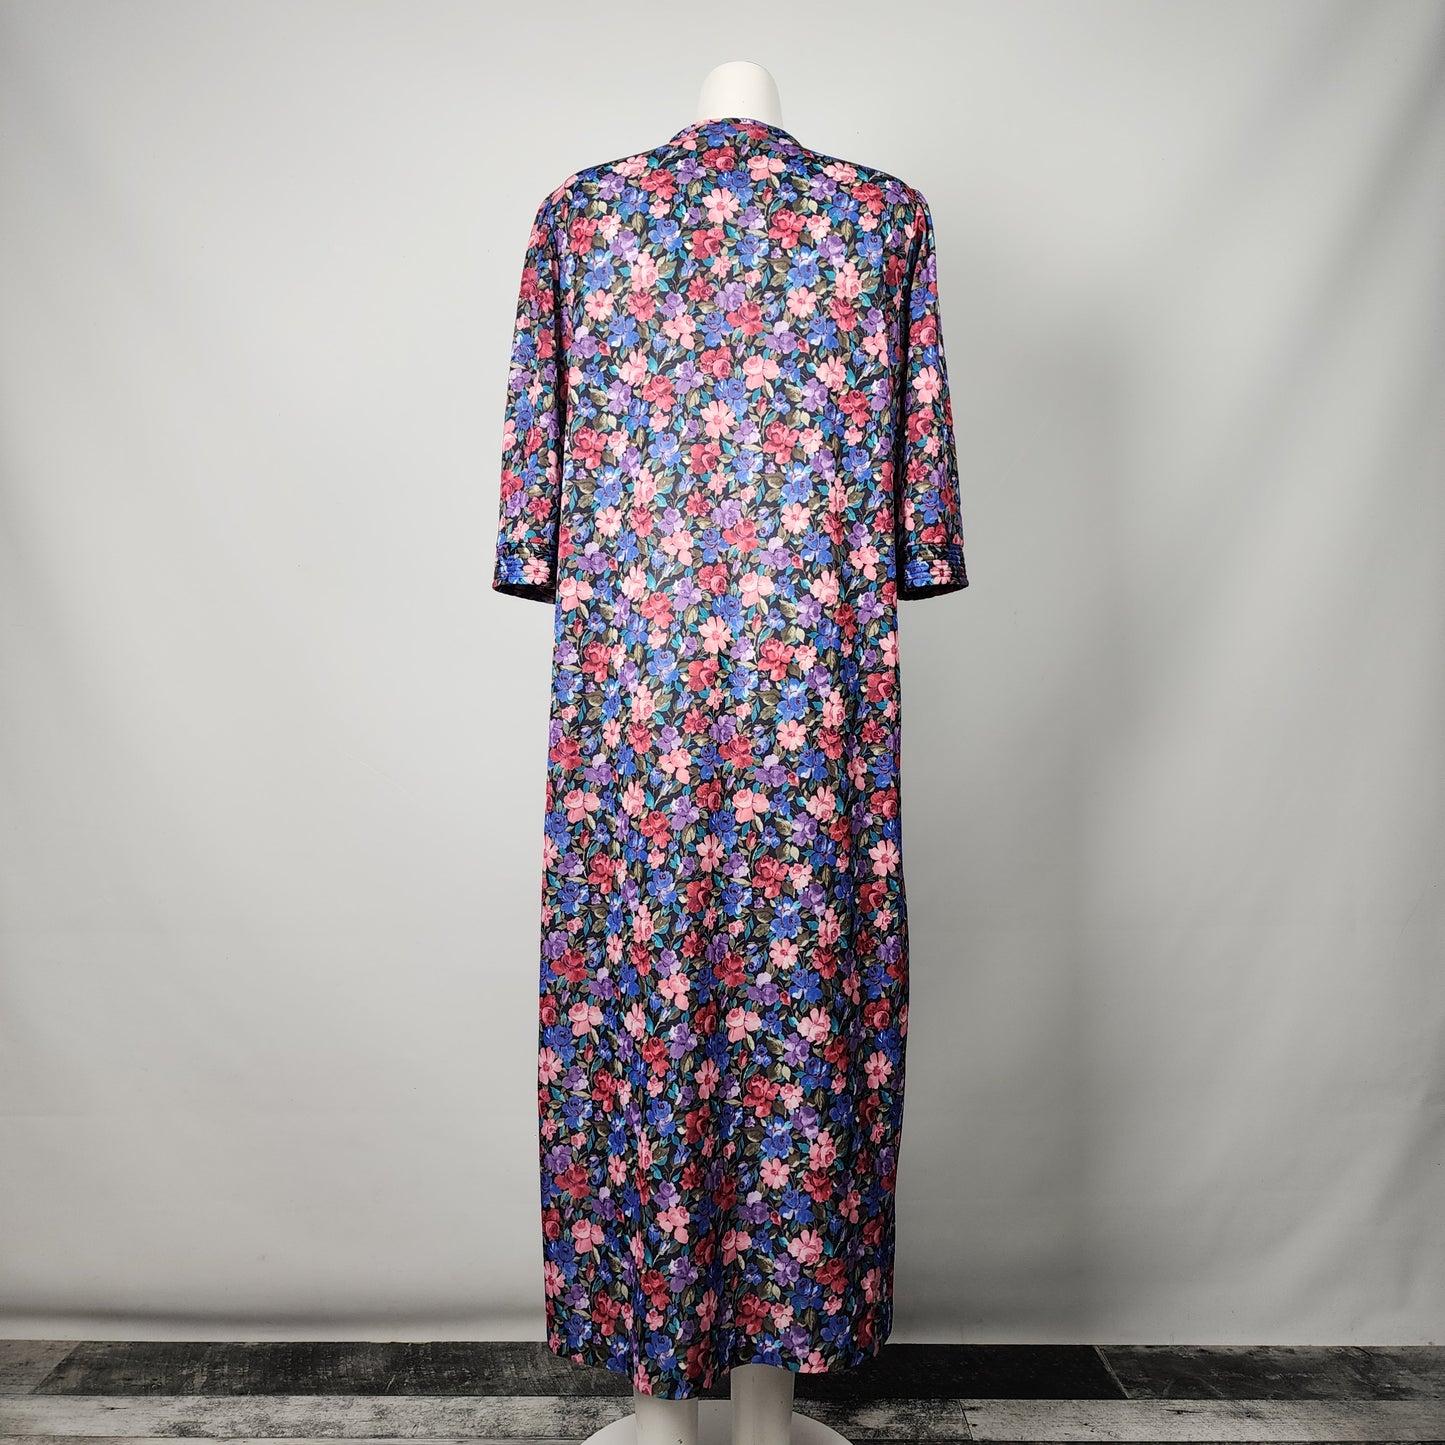 Vintage Carny G Floral Print Night Gown Dress Size M/L